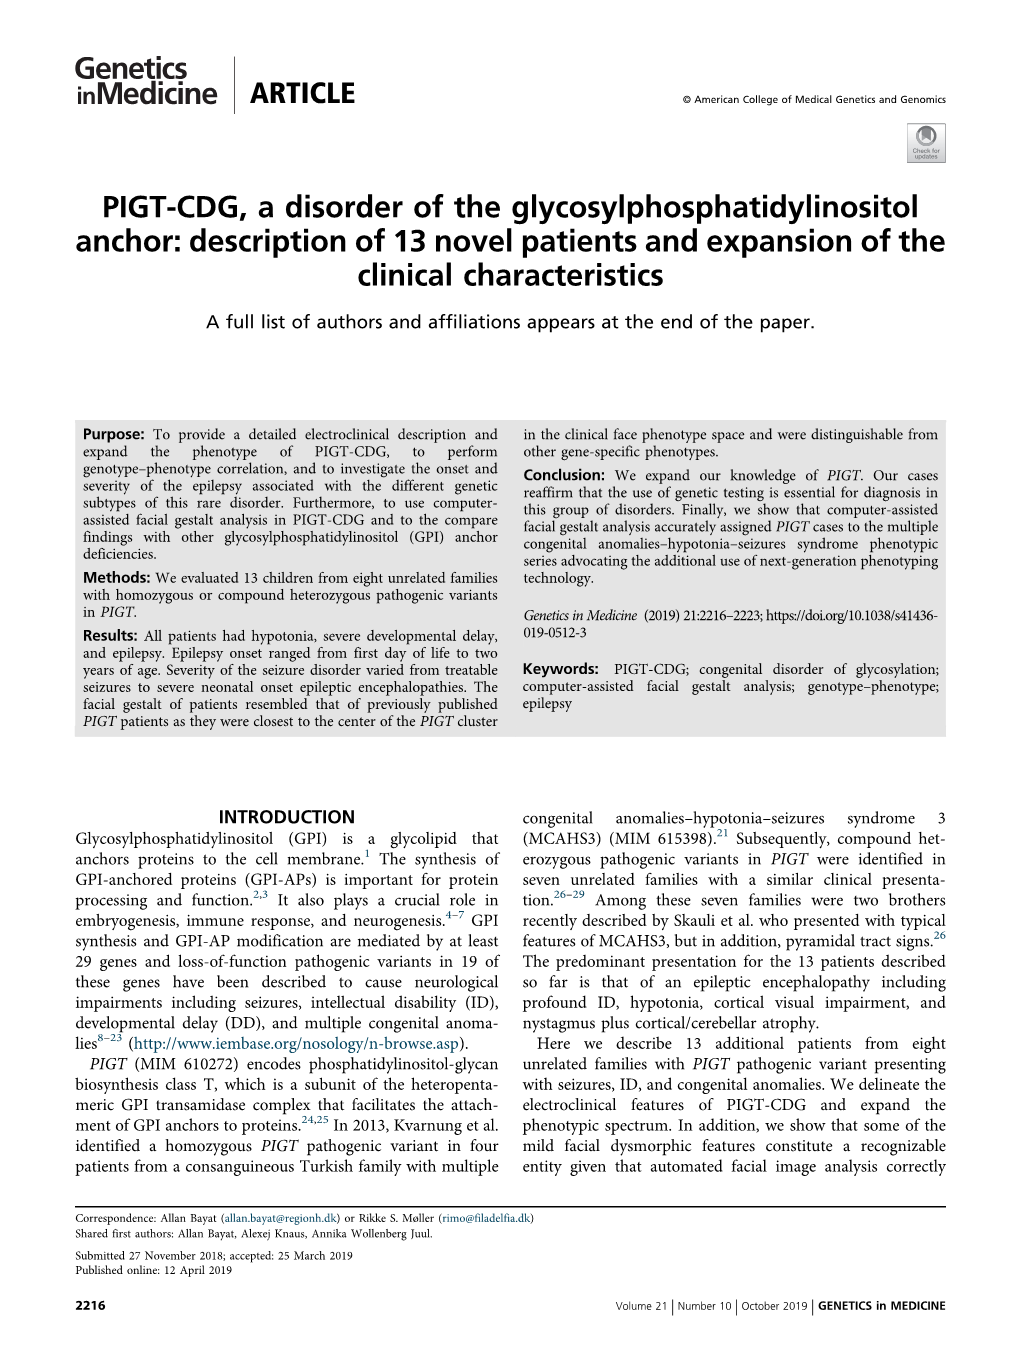 PIGT-CDG, a Disorder of the Glycosylphosphatidylinositol Anchor: Description of 13 Novel Patients and Expansion of the Clinical Characteristics